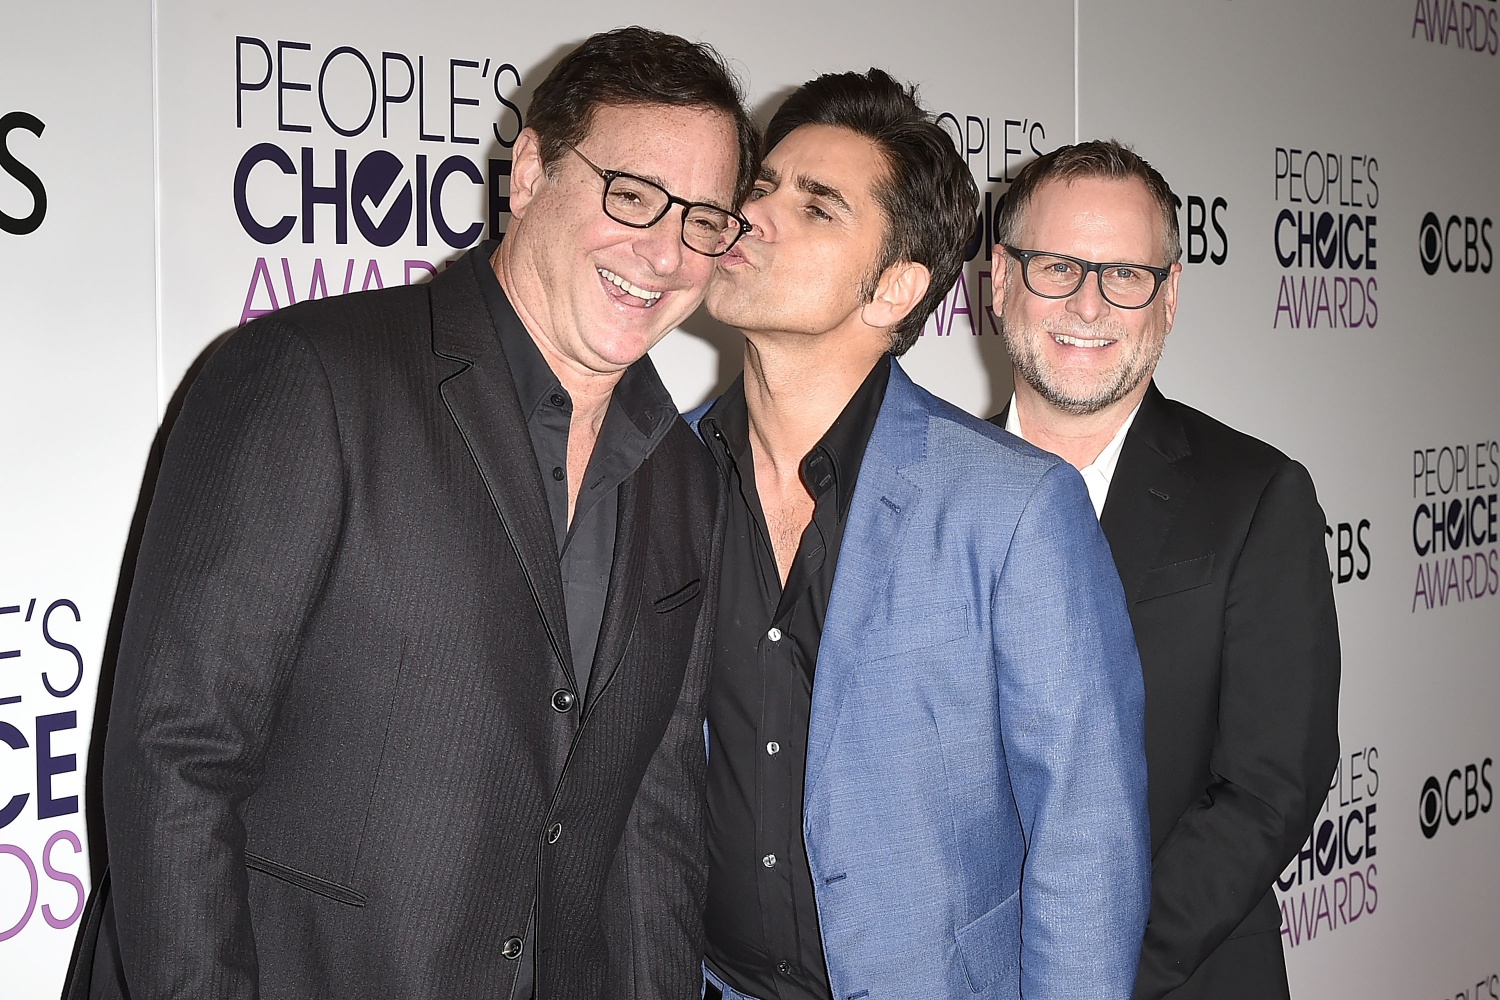 Bob Saget, John Stamos and Dave Coulier attend the People's Choice Awards 2017 - Press Room at Microsoft Theater on January 18, 2017 in Los Angeles, California. 